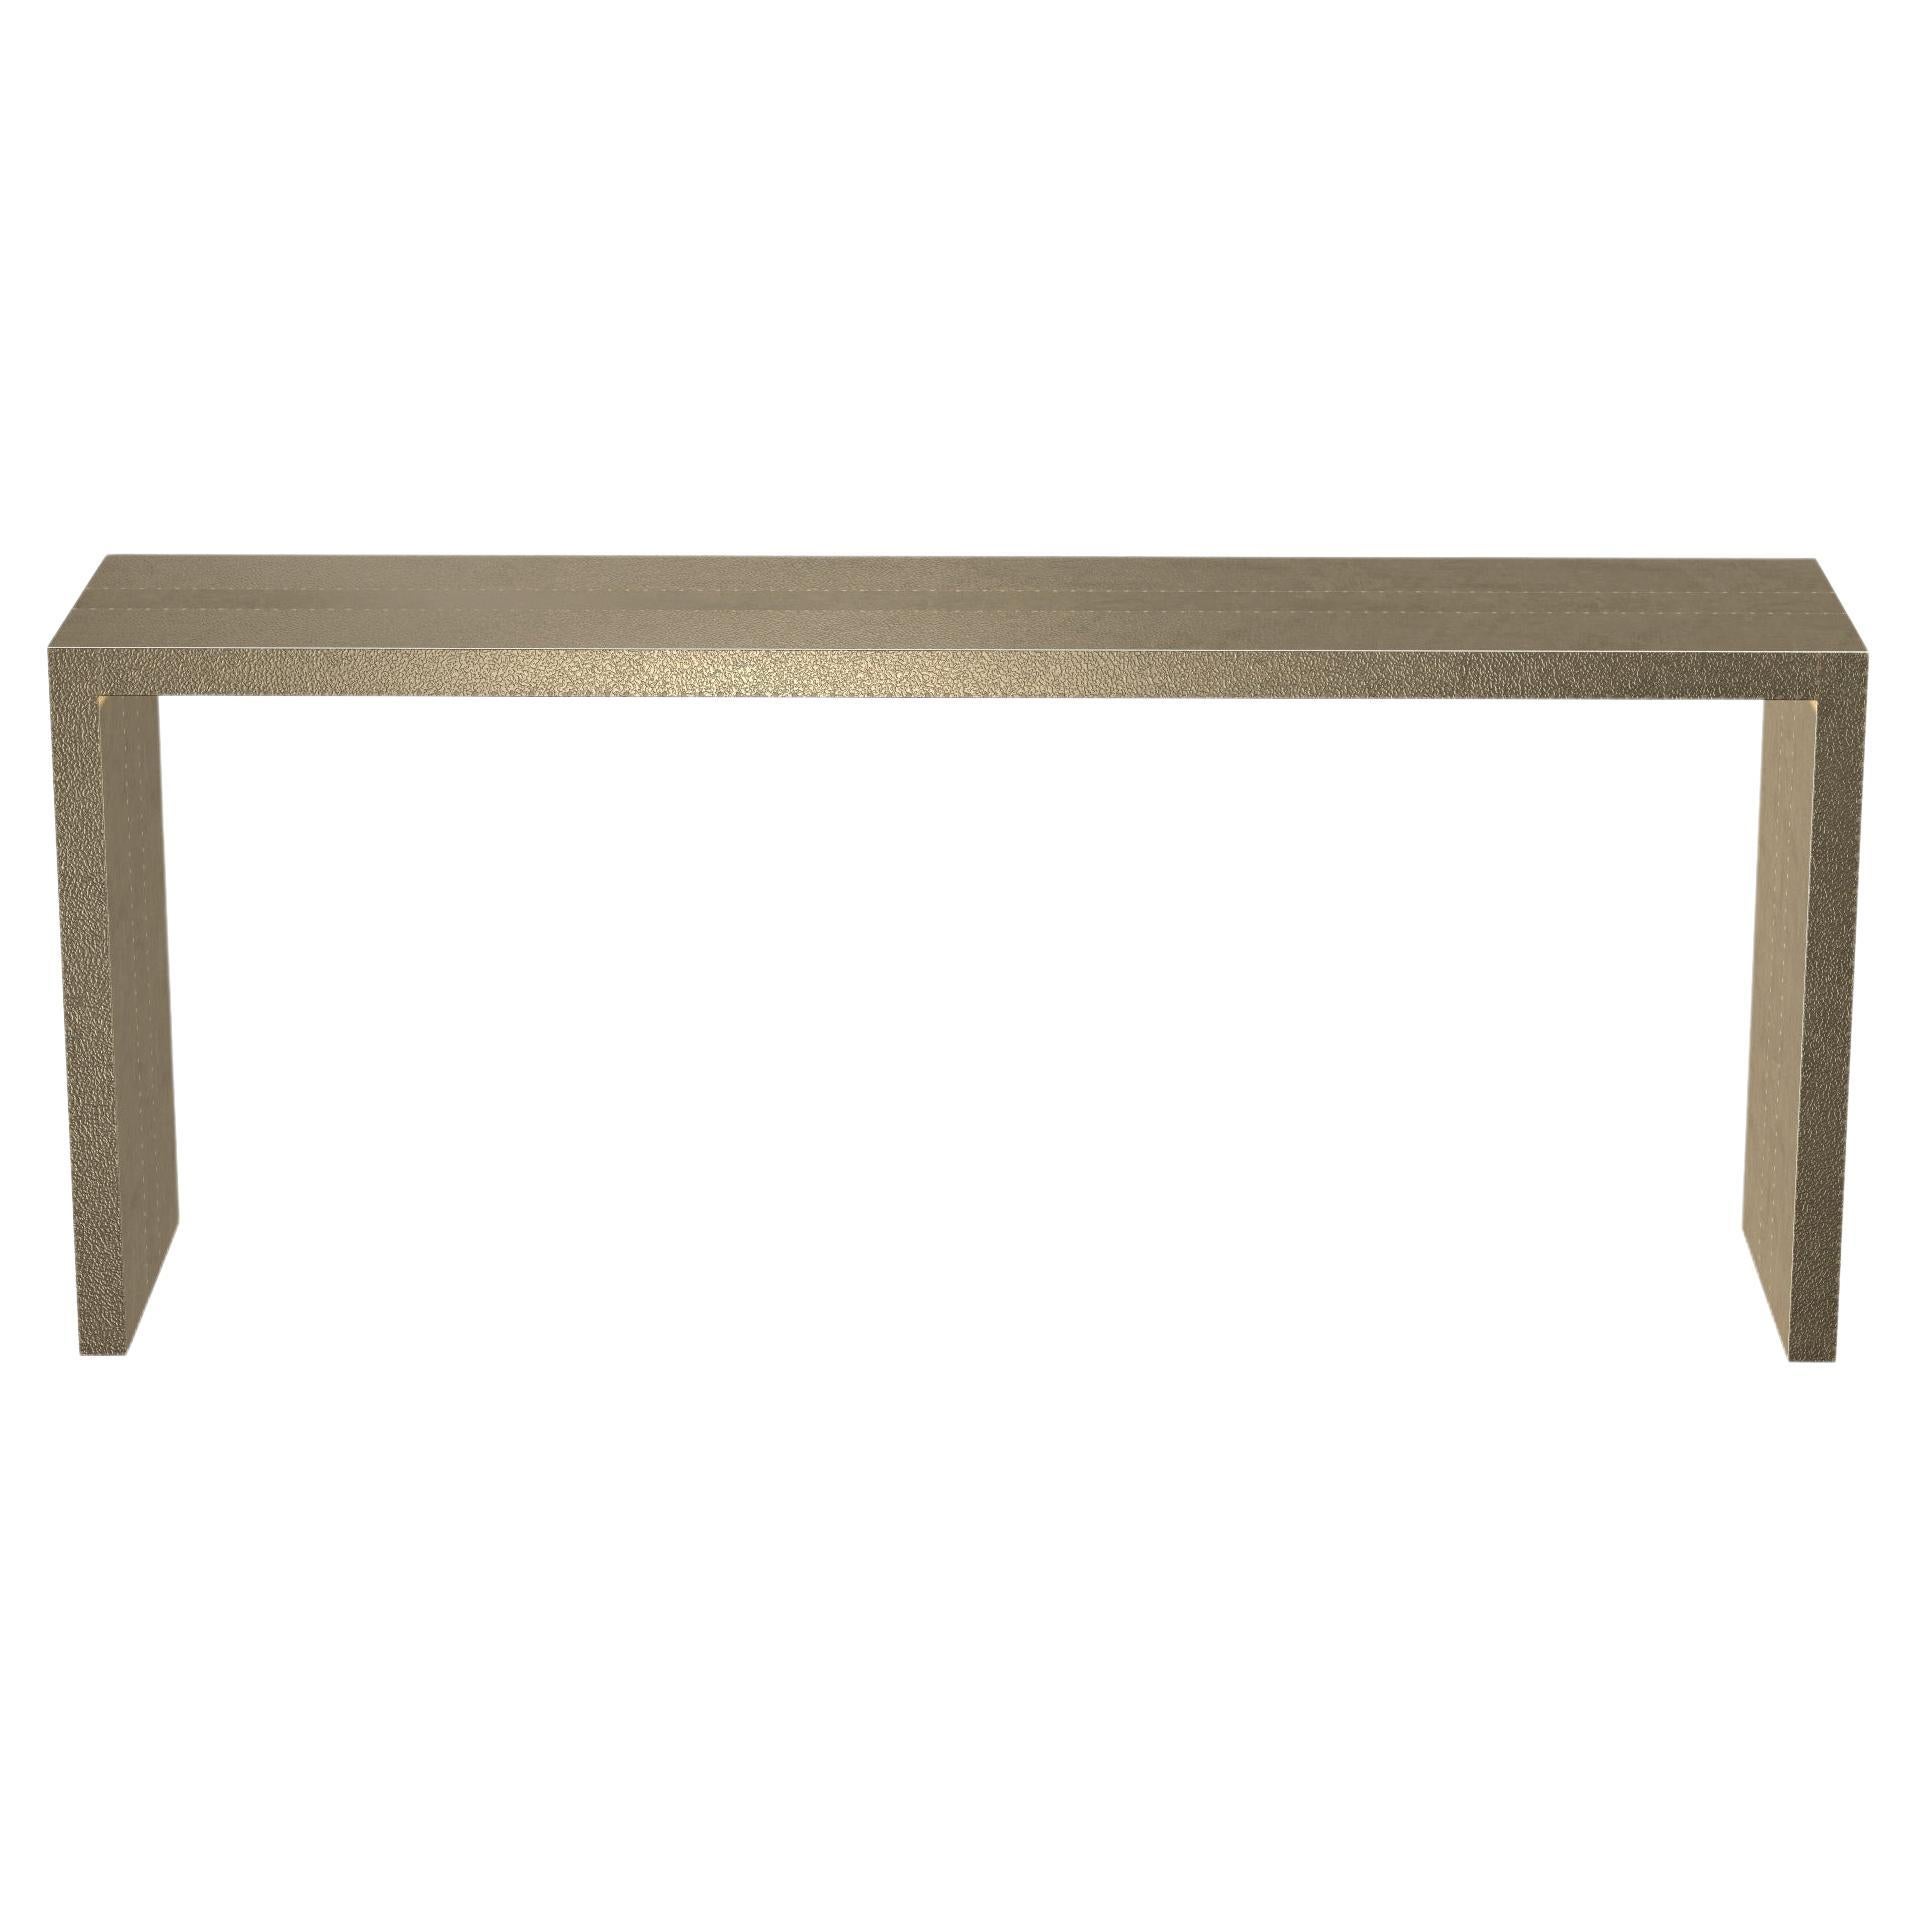 Art Nouveau Tray Console Tables in Copper Fine Hammered by Alison Spear